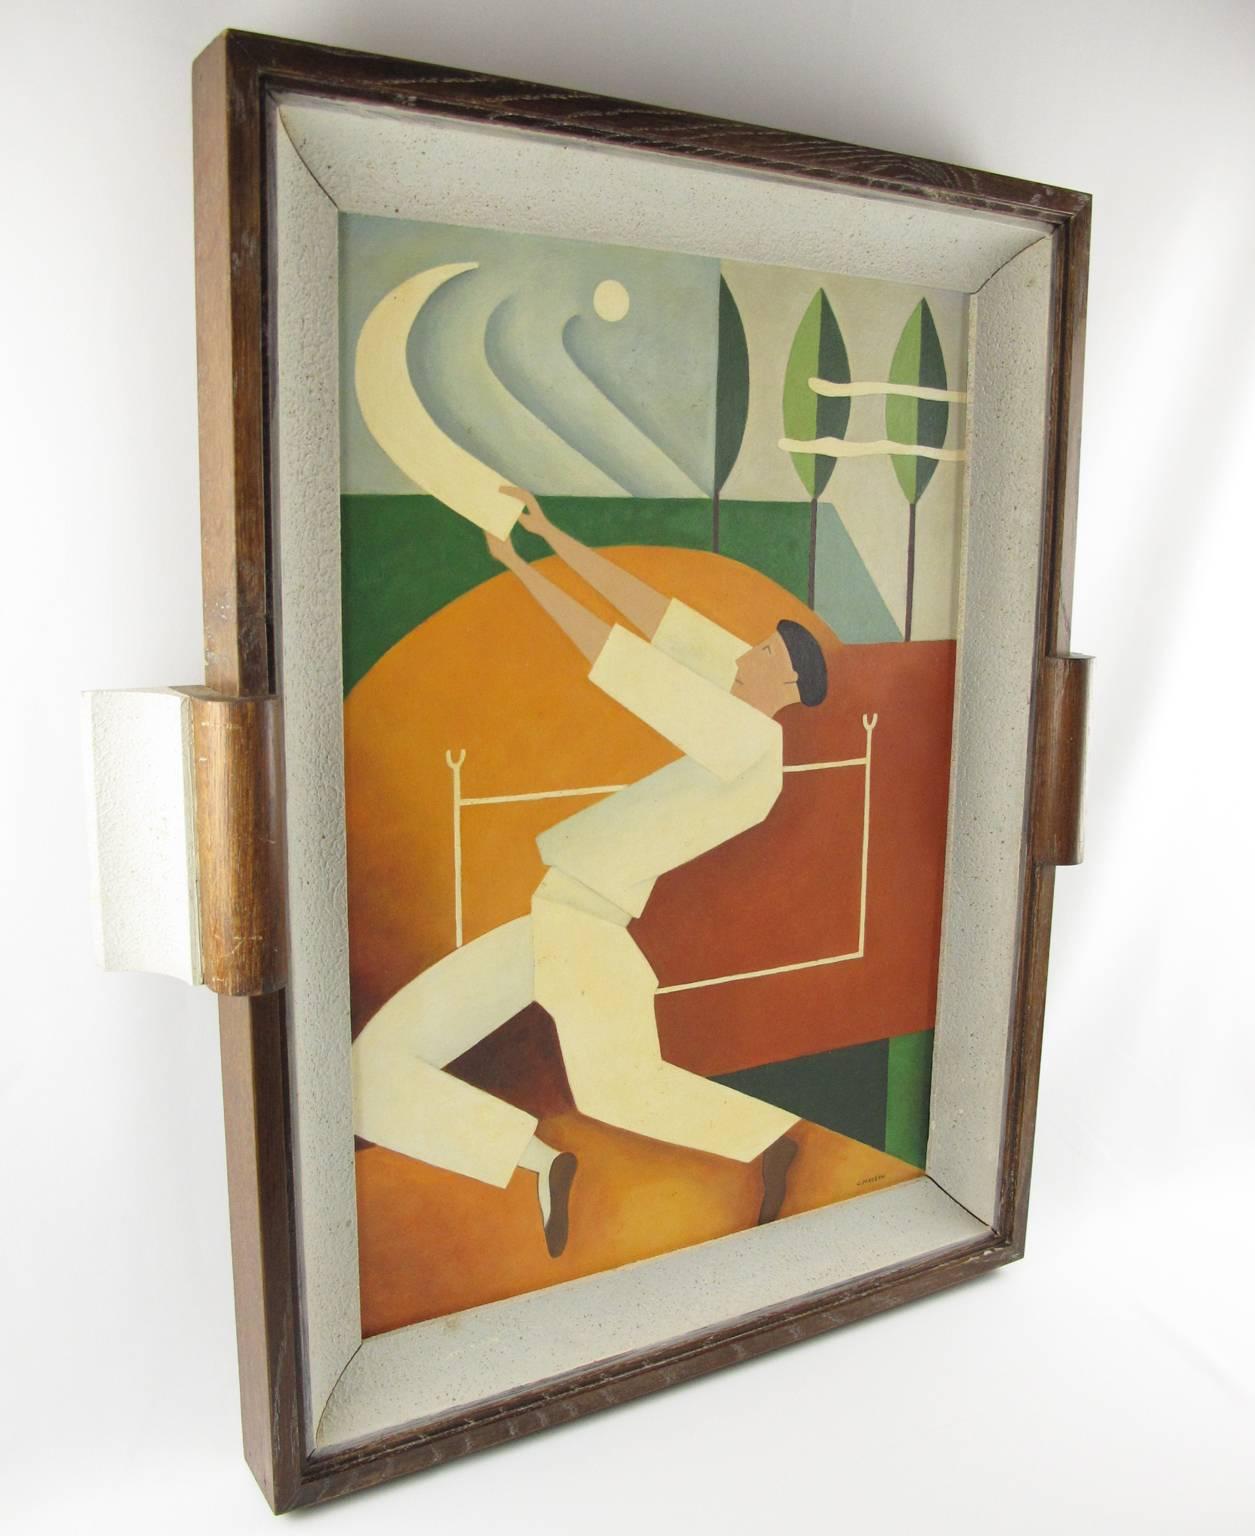 Cerused Art Deco Cubist Gouache on Board Painting by C. Massin Sport, Chistera, Jai Alai